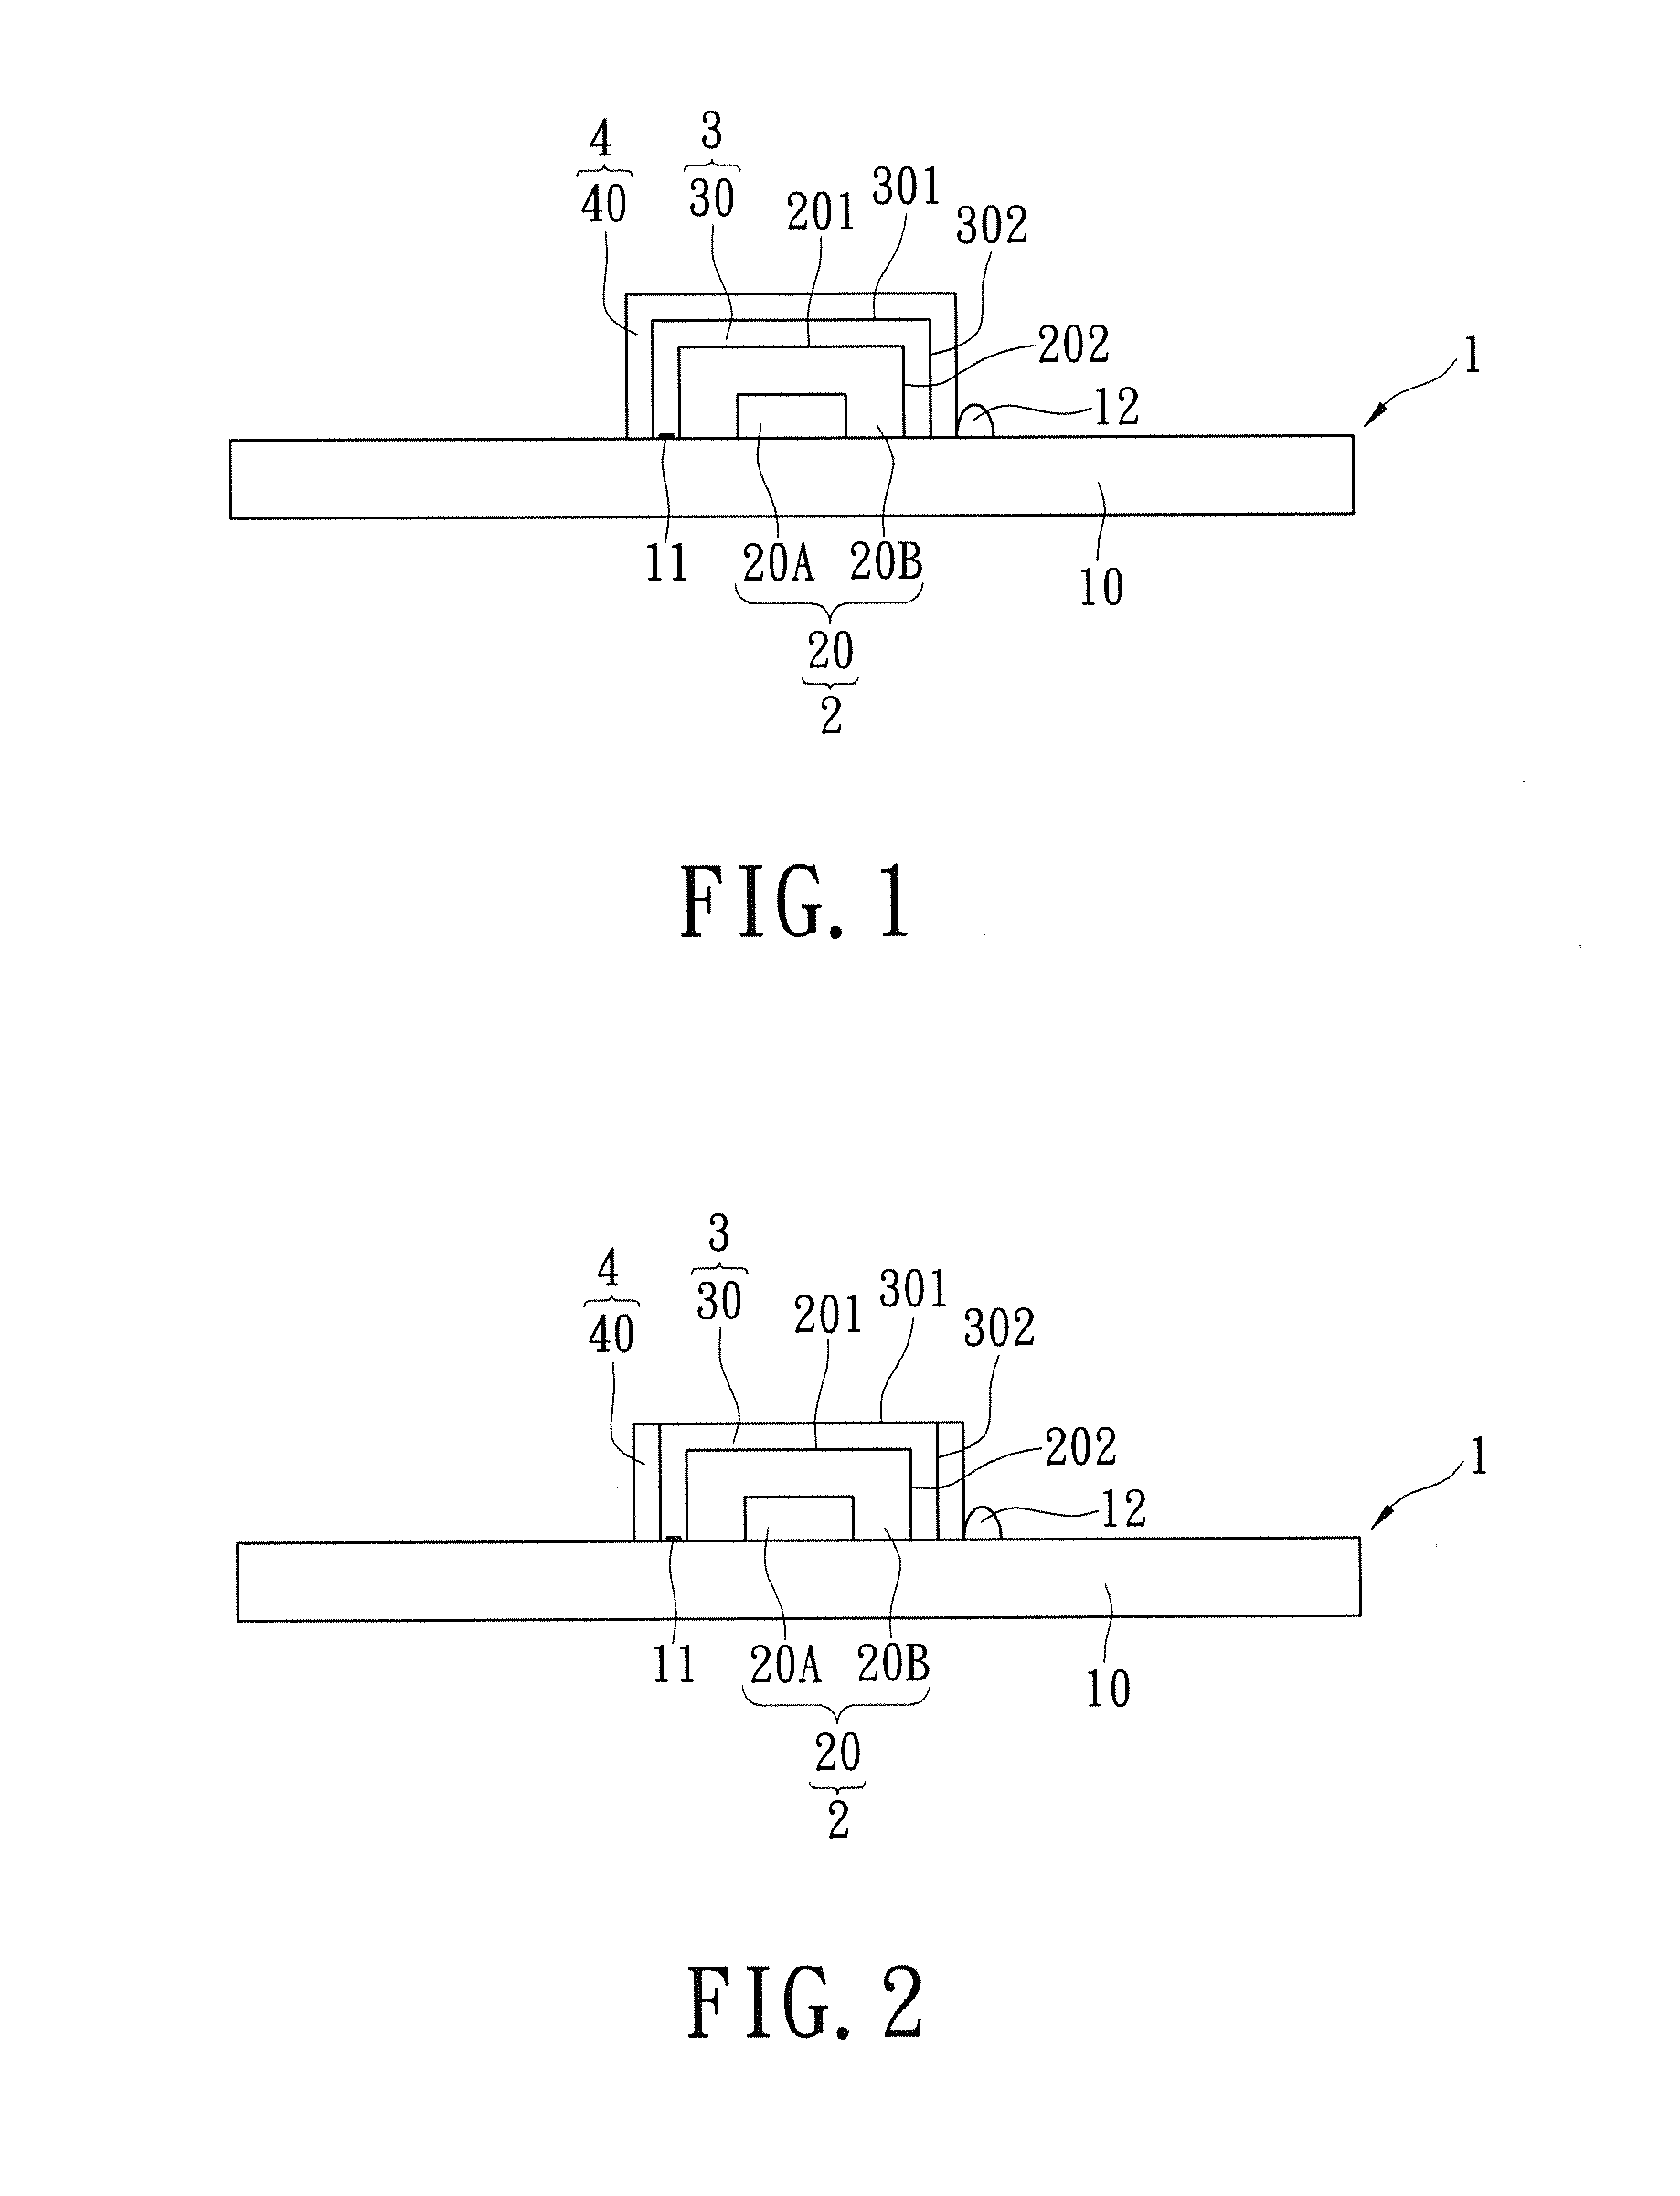 Module IC package structure having a metal shielding function for preventing electrical malfunction induced by short-circuit